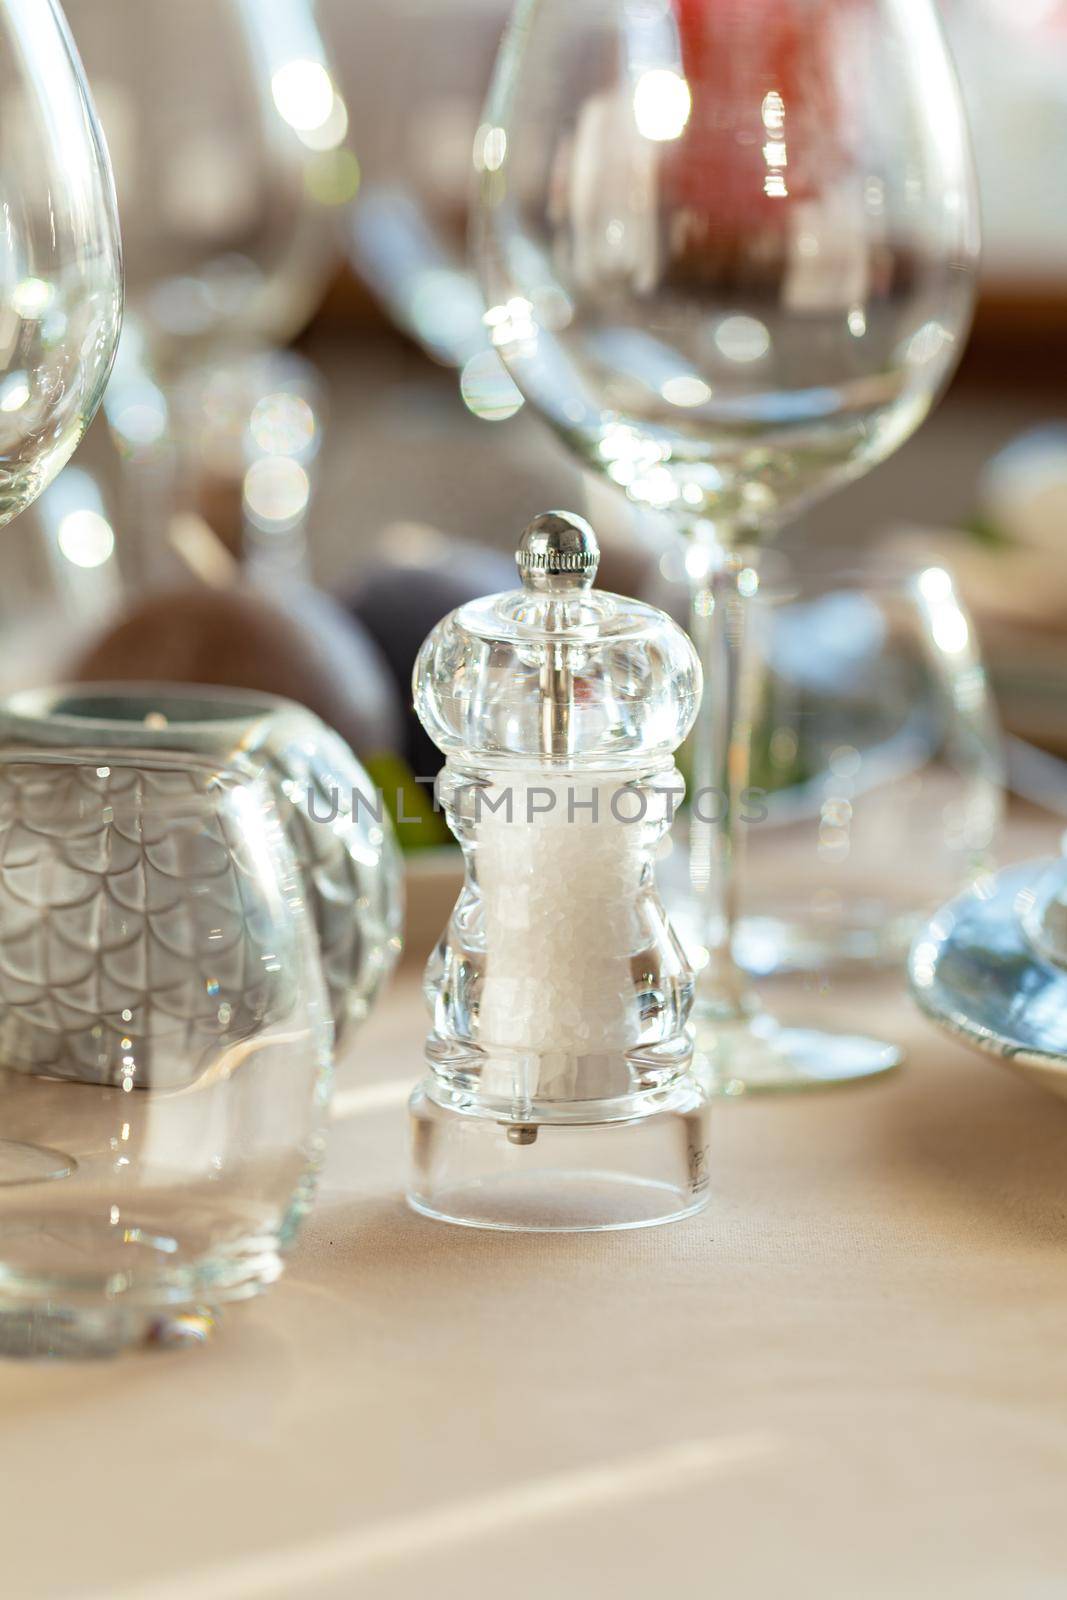 Close up photo of a table setting by Fabrikasimf